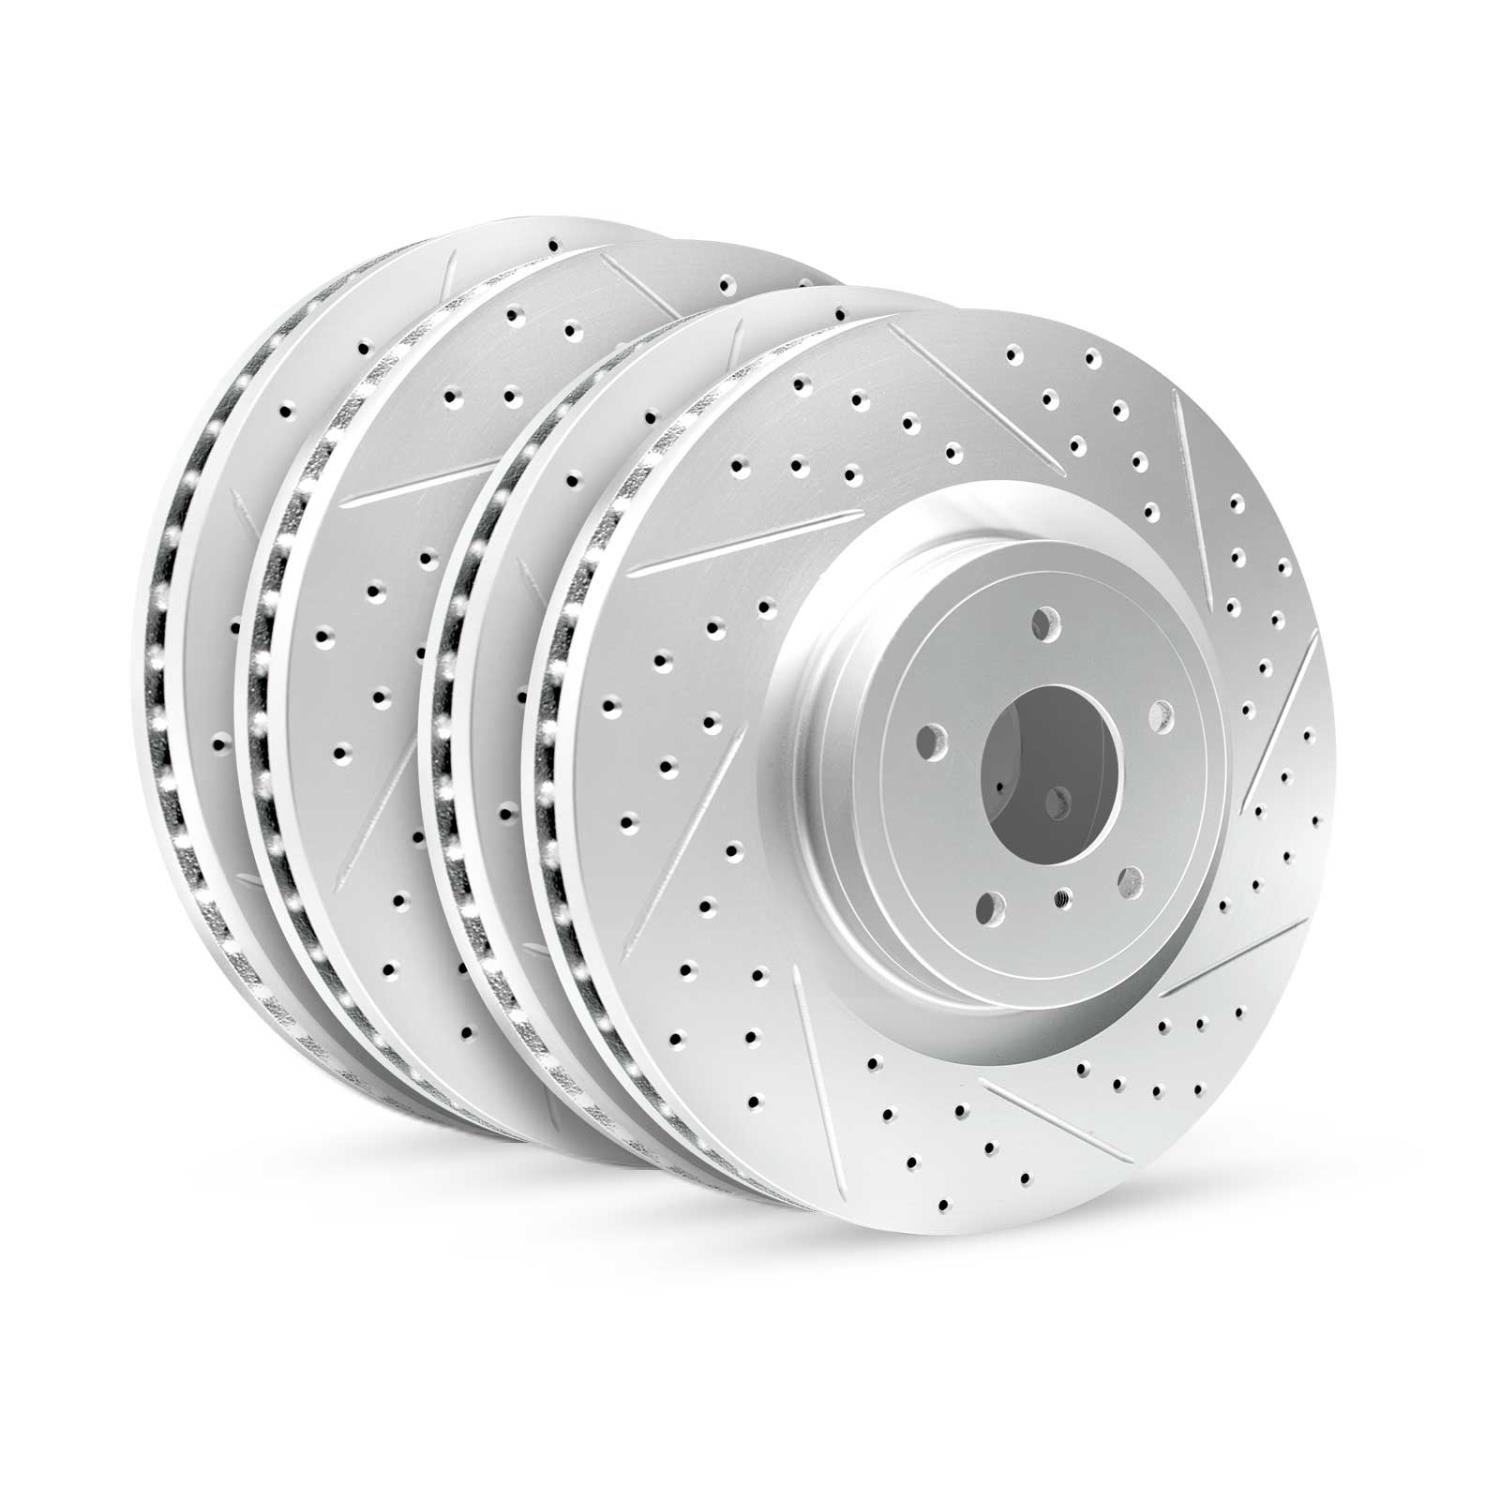 GEO-Carbon Drilled/Slotted Rotors, 2007-2012 Lexus/Toyota/Scion,